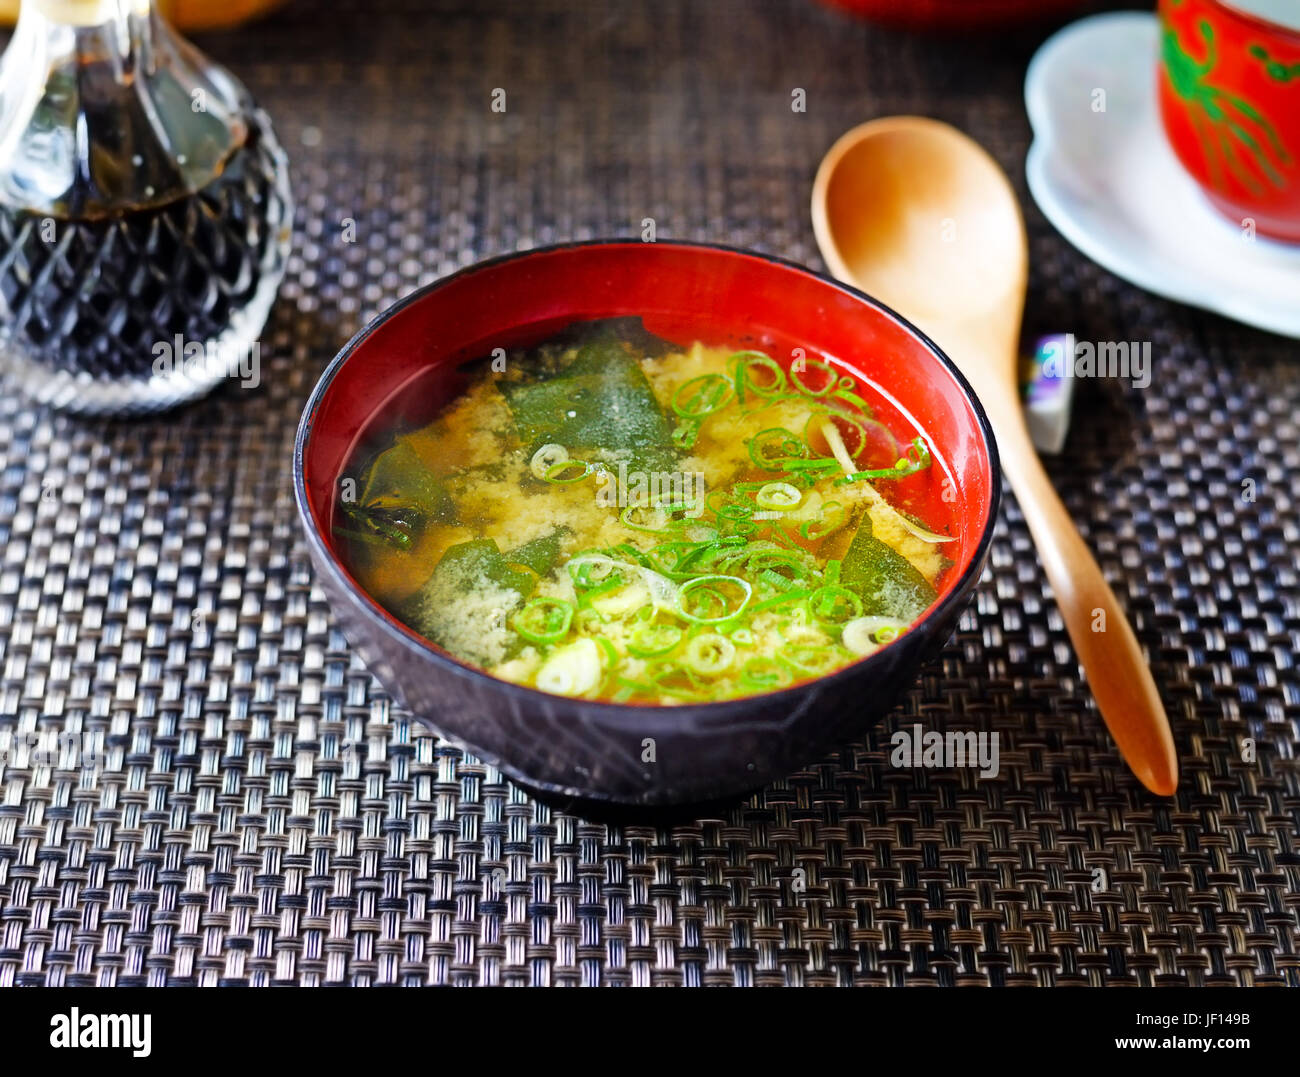 A closeup of a steaming bowl of Japanese miso soup from above, against a dark background. Stock Photo